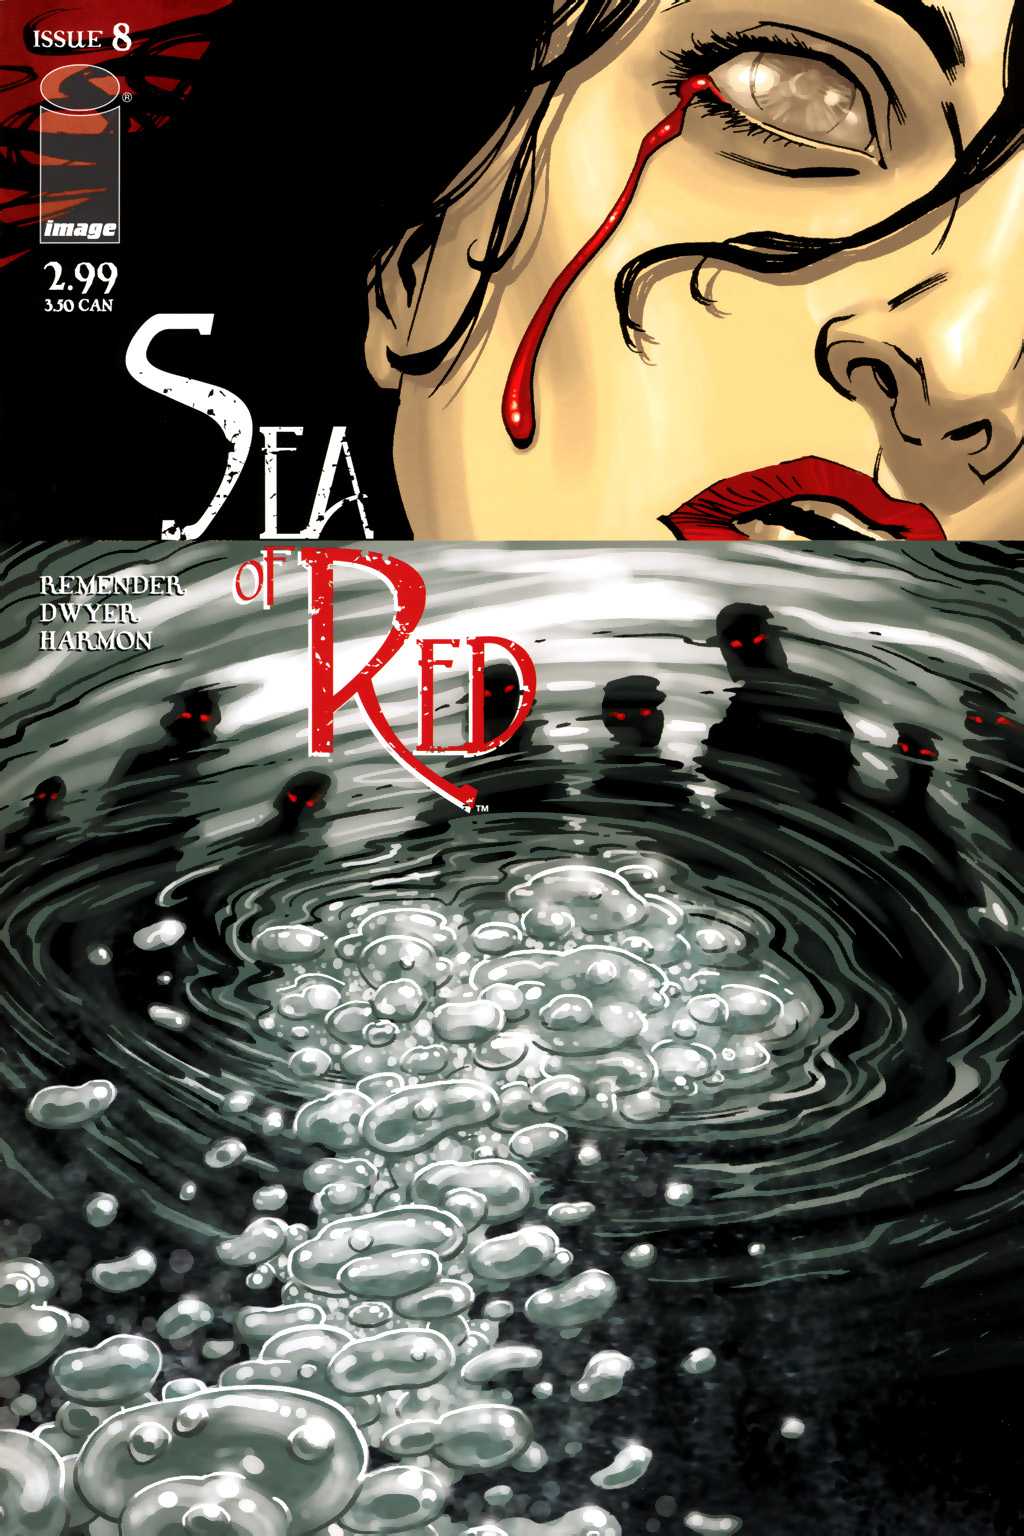 Sea of Red #8 